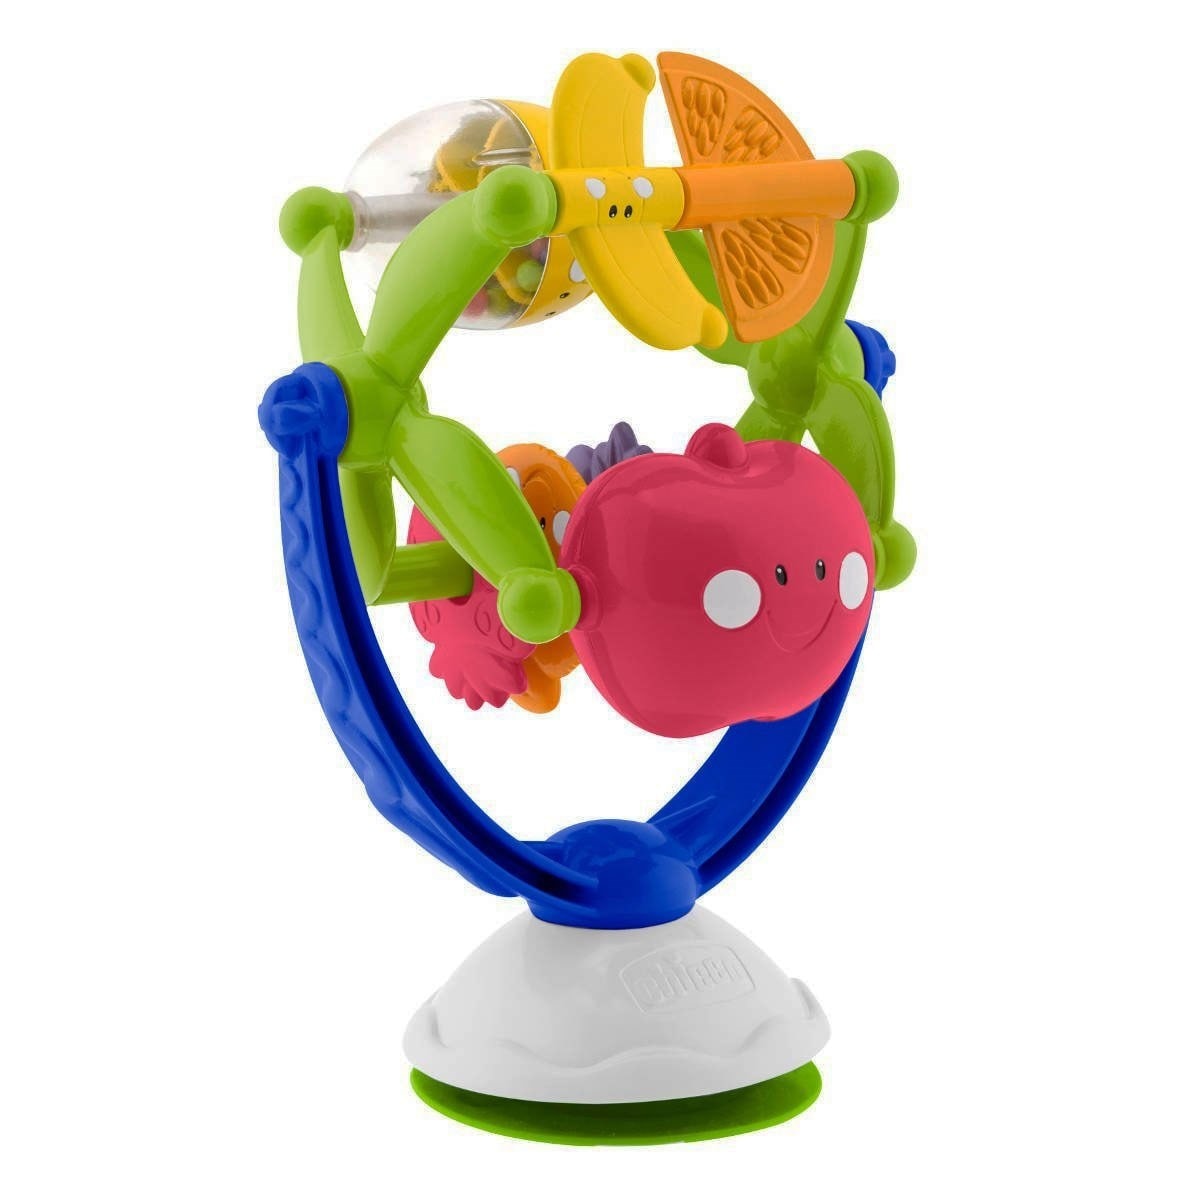 Hochet ventouse musical Fruits CHICCO Pas Cher 